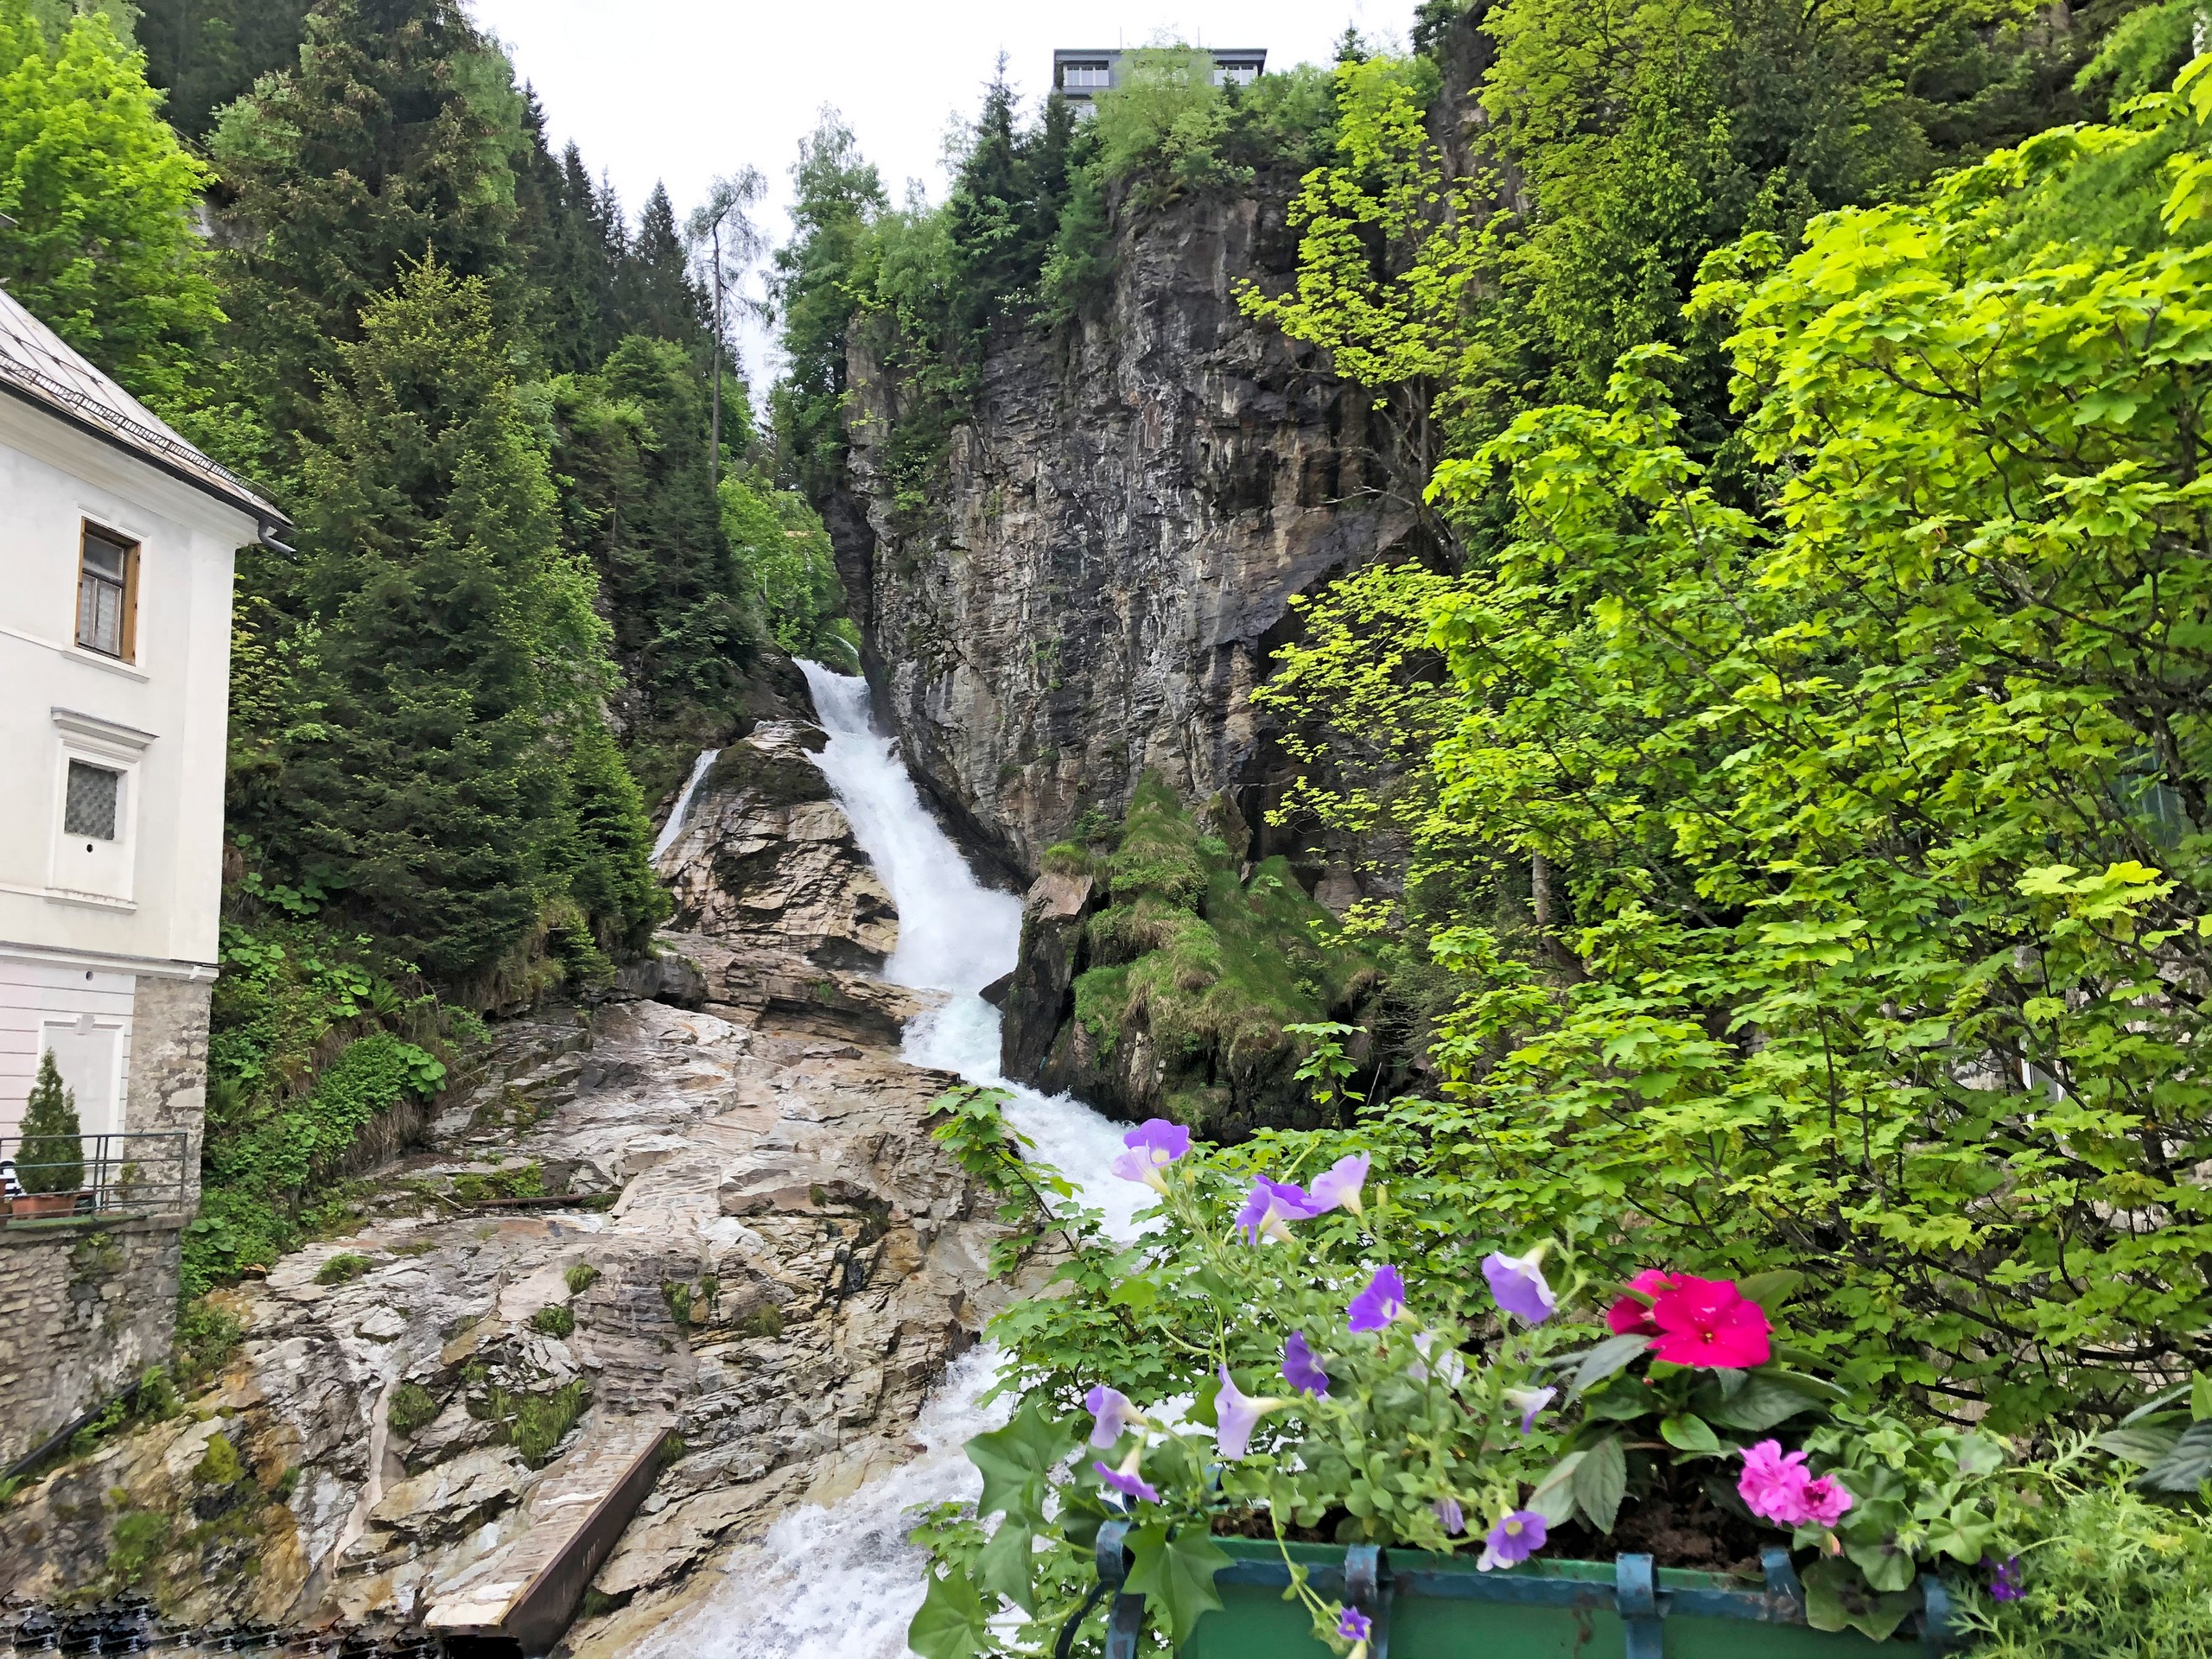 Small lunch break with stopping near the waterfall on Alpe Adria trail